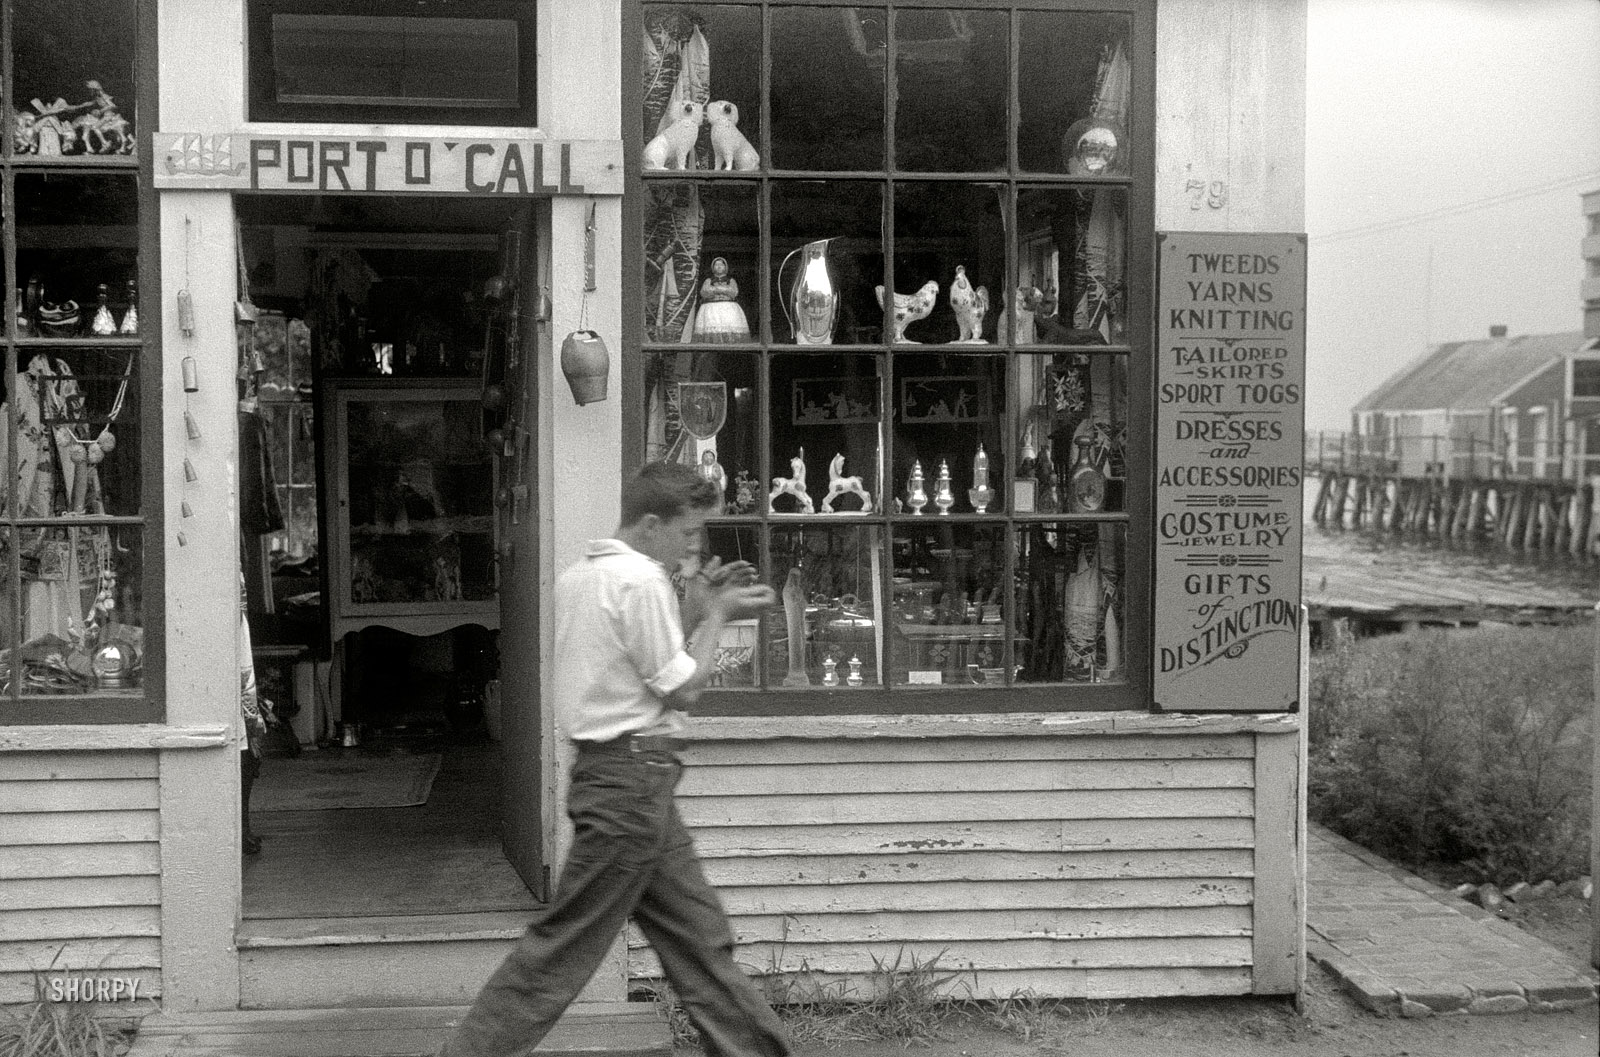 August 1940. "Souvenir shop, Provincetown, Massachusetts." 35mm negative by Edwin Rosskam for the Farm Security Administration. View full size.